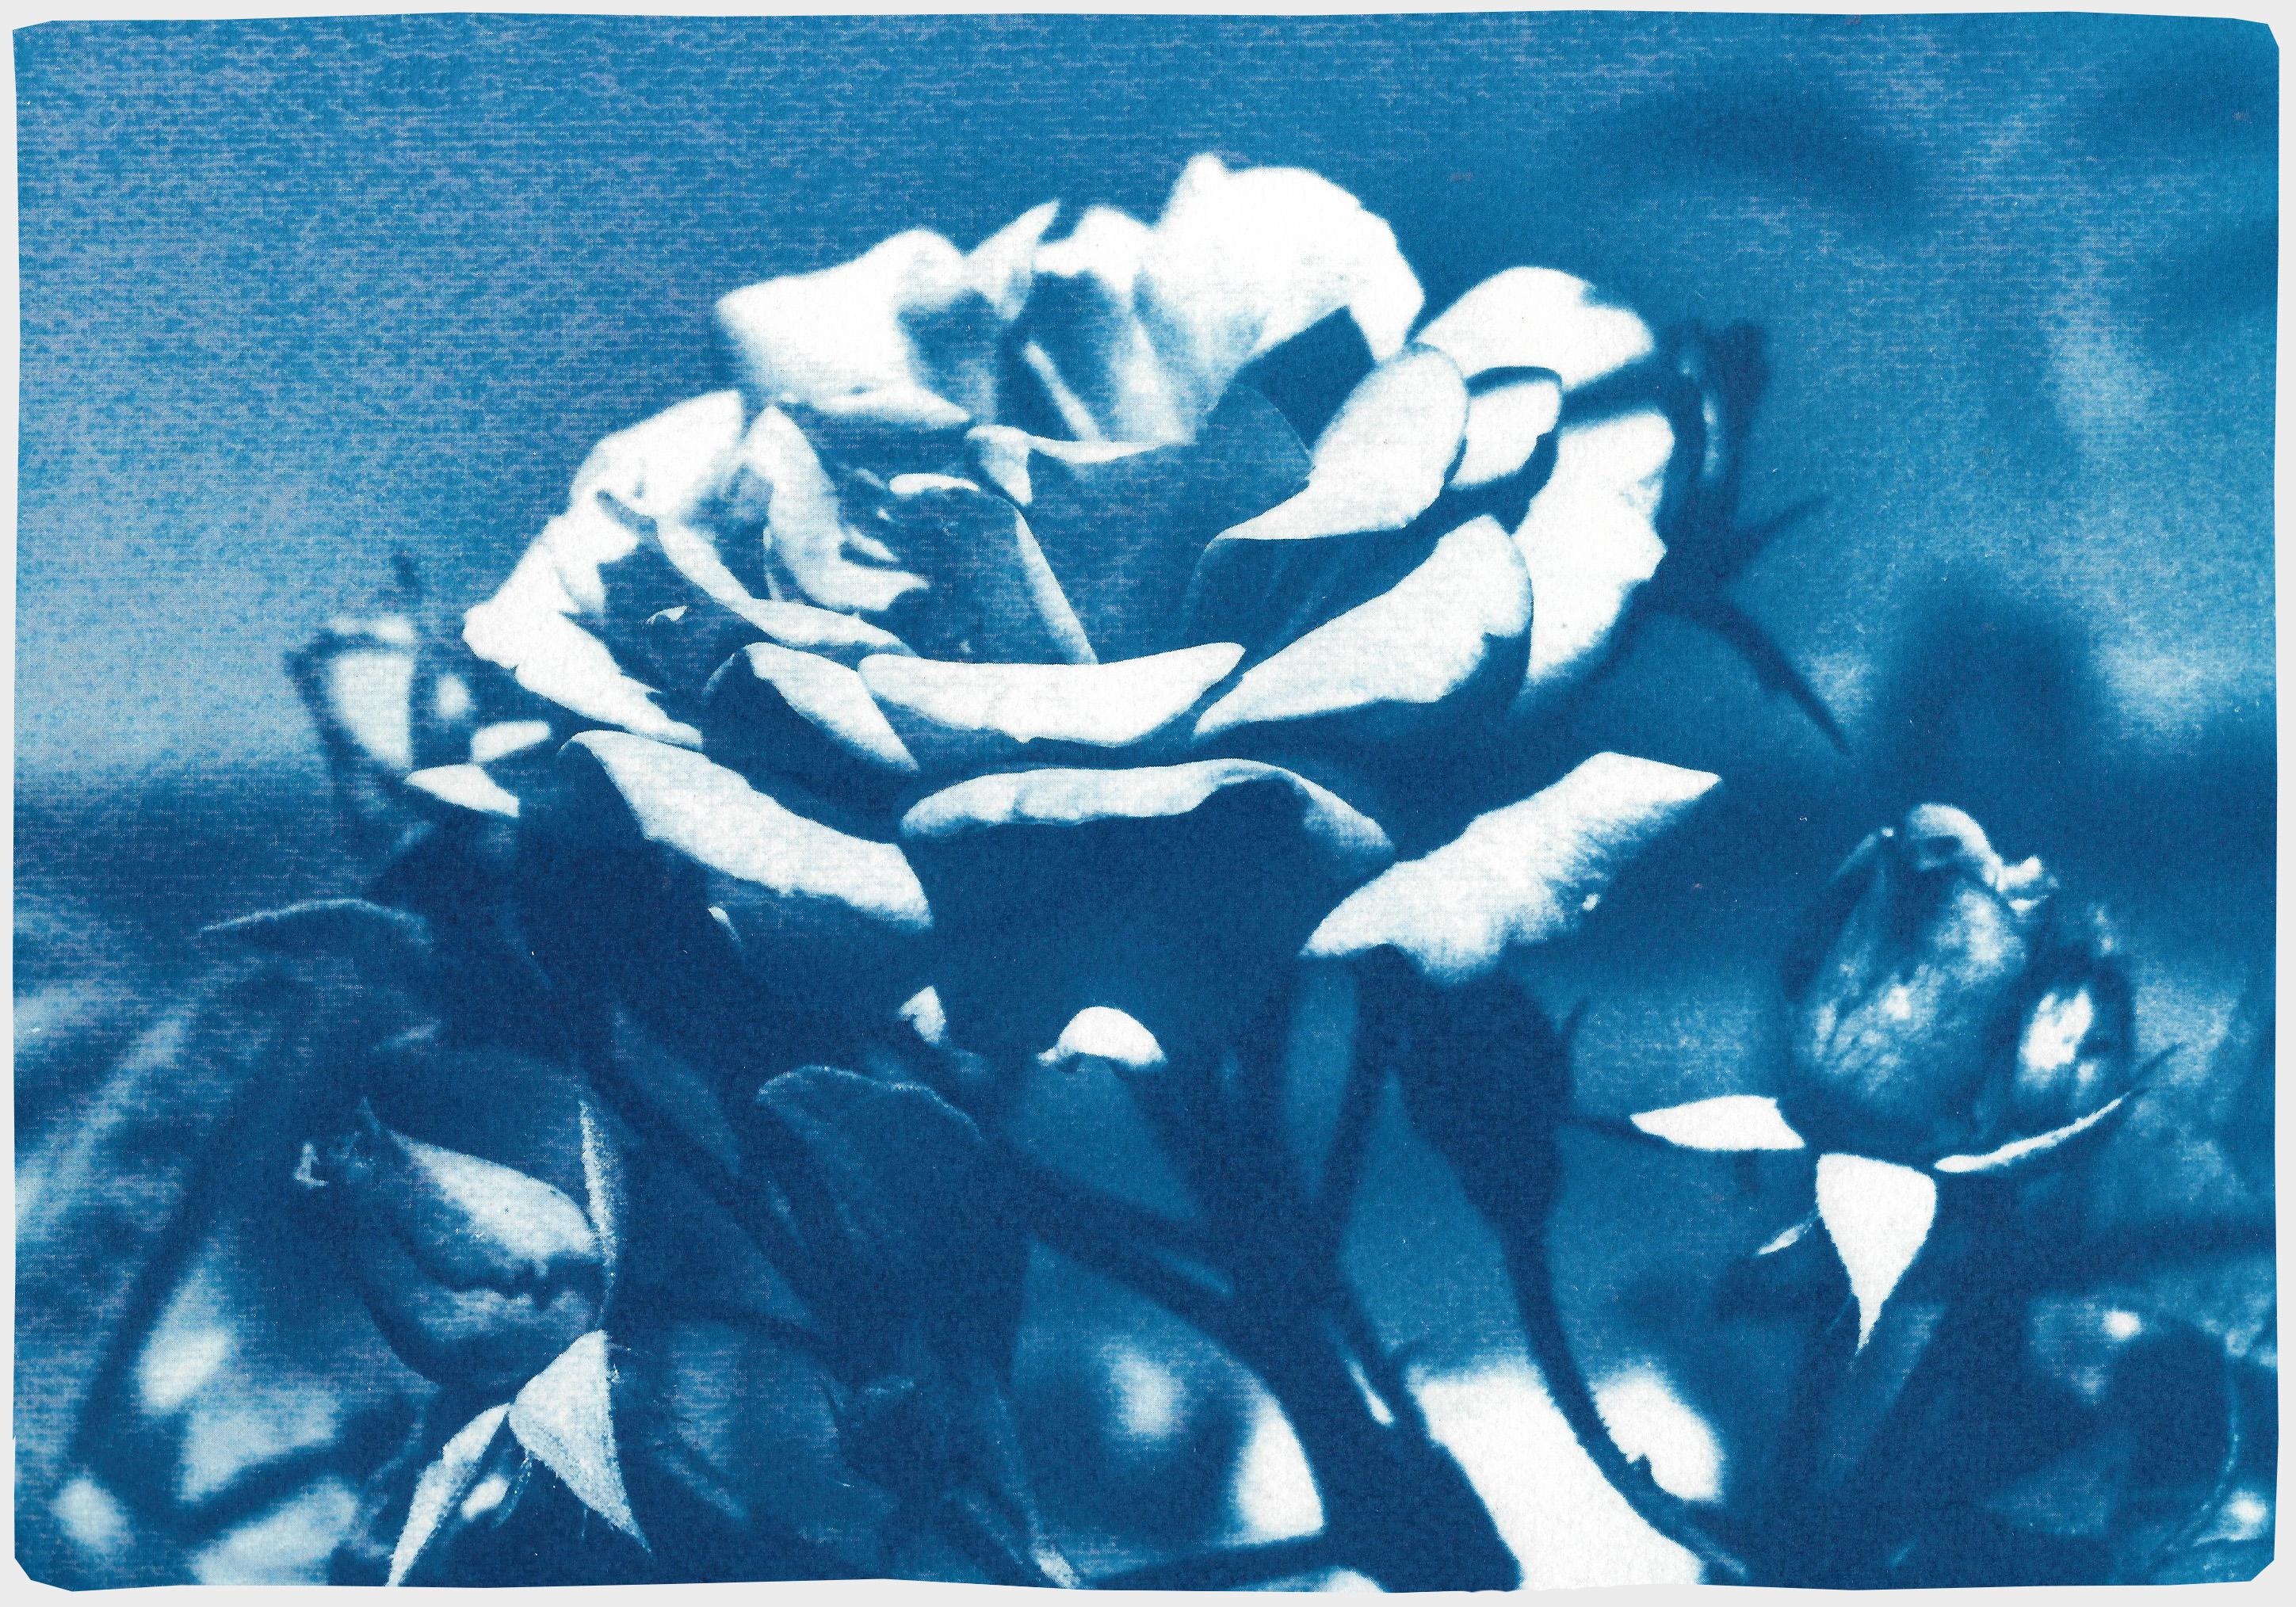 Blue and White Rose, Botanical Cyanotype of a Single Flower on Watercolor Paper